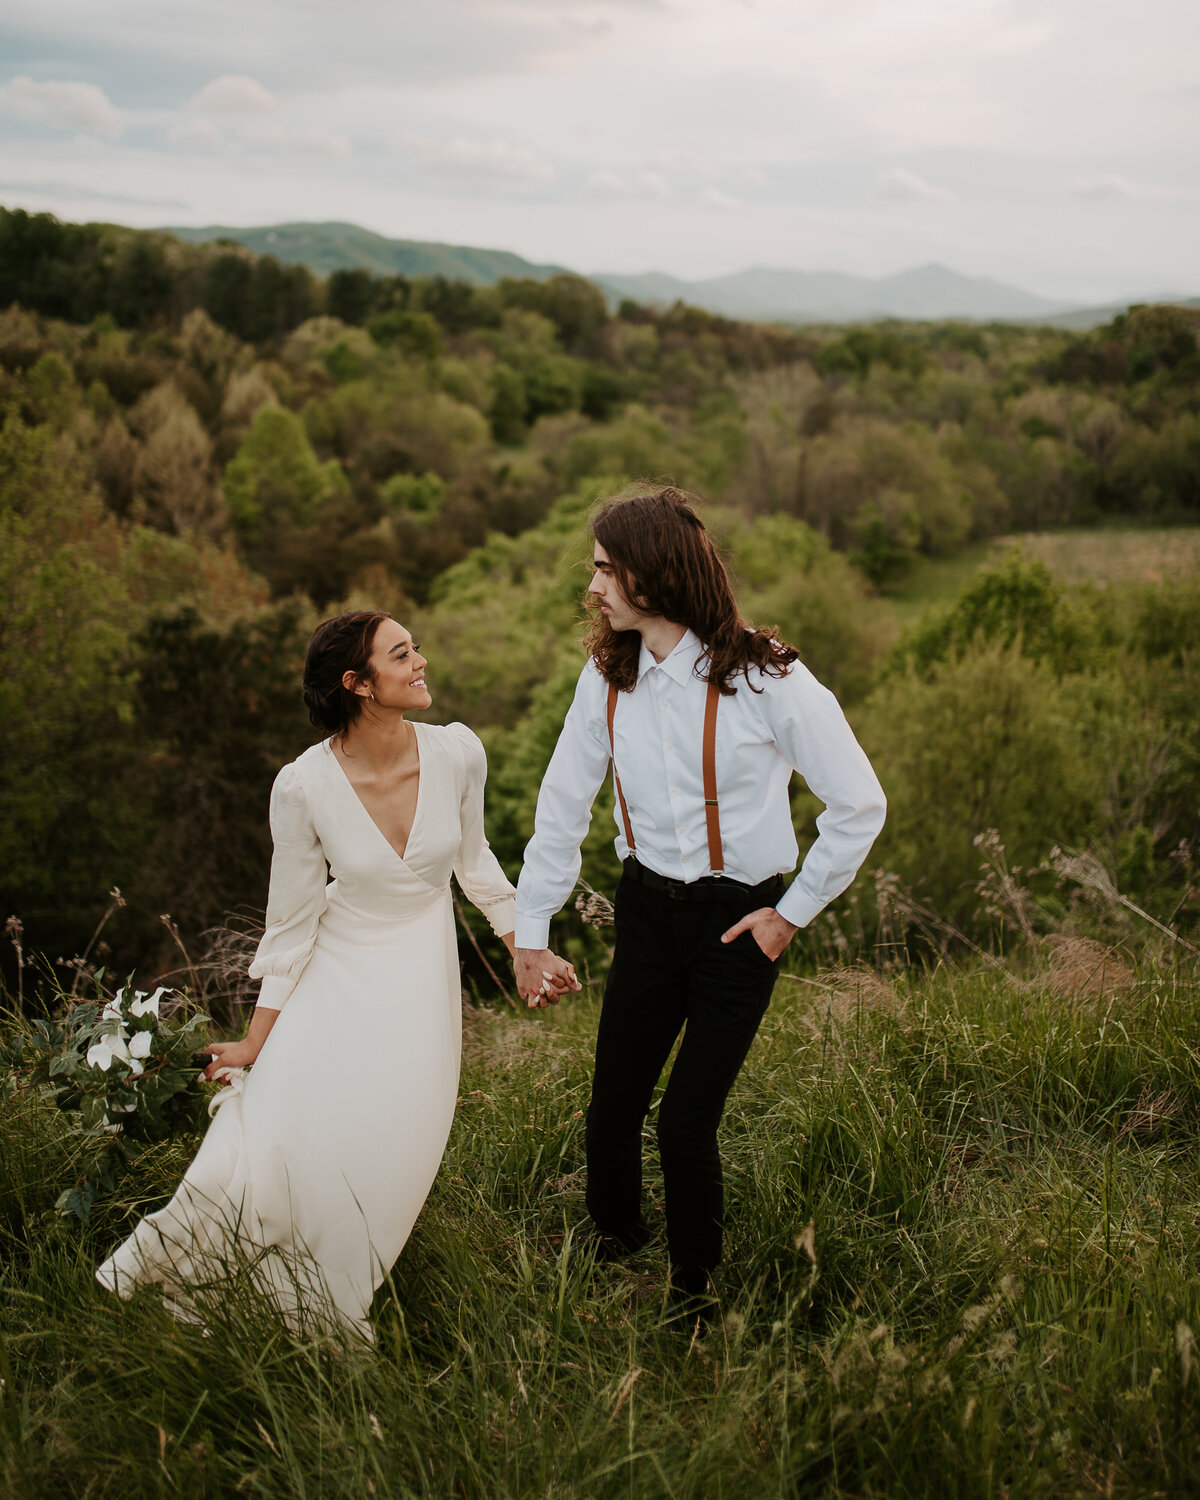 Walking through tall grass in the field after their ceremony on the parkway in North Carolina.